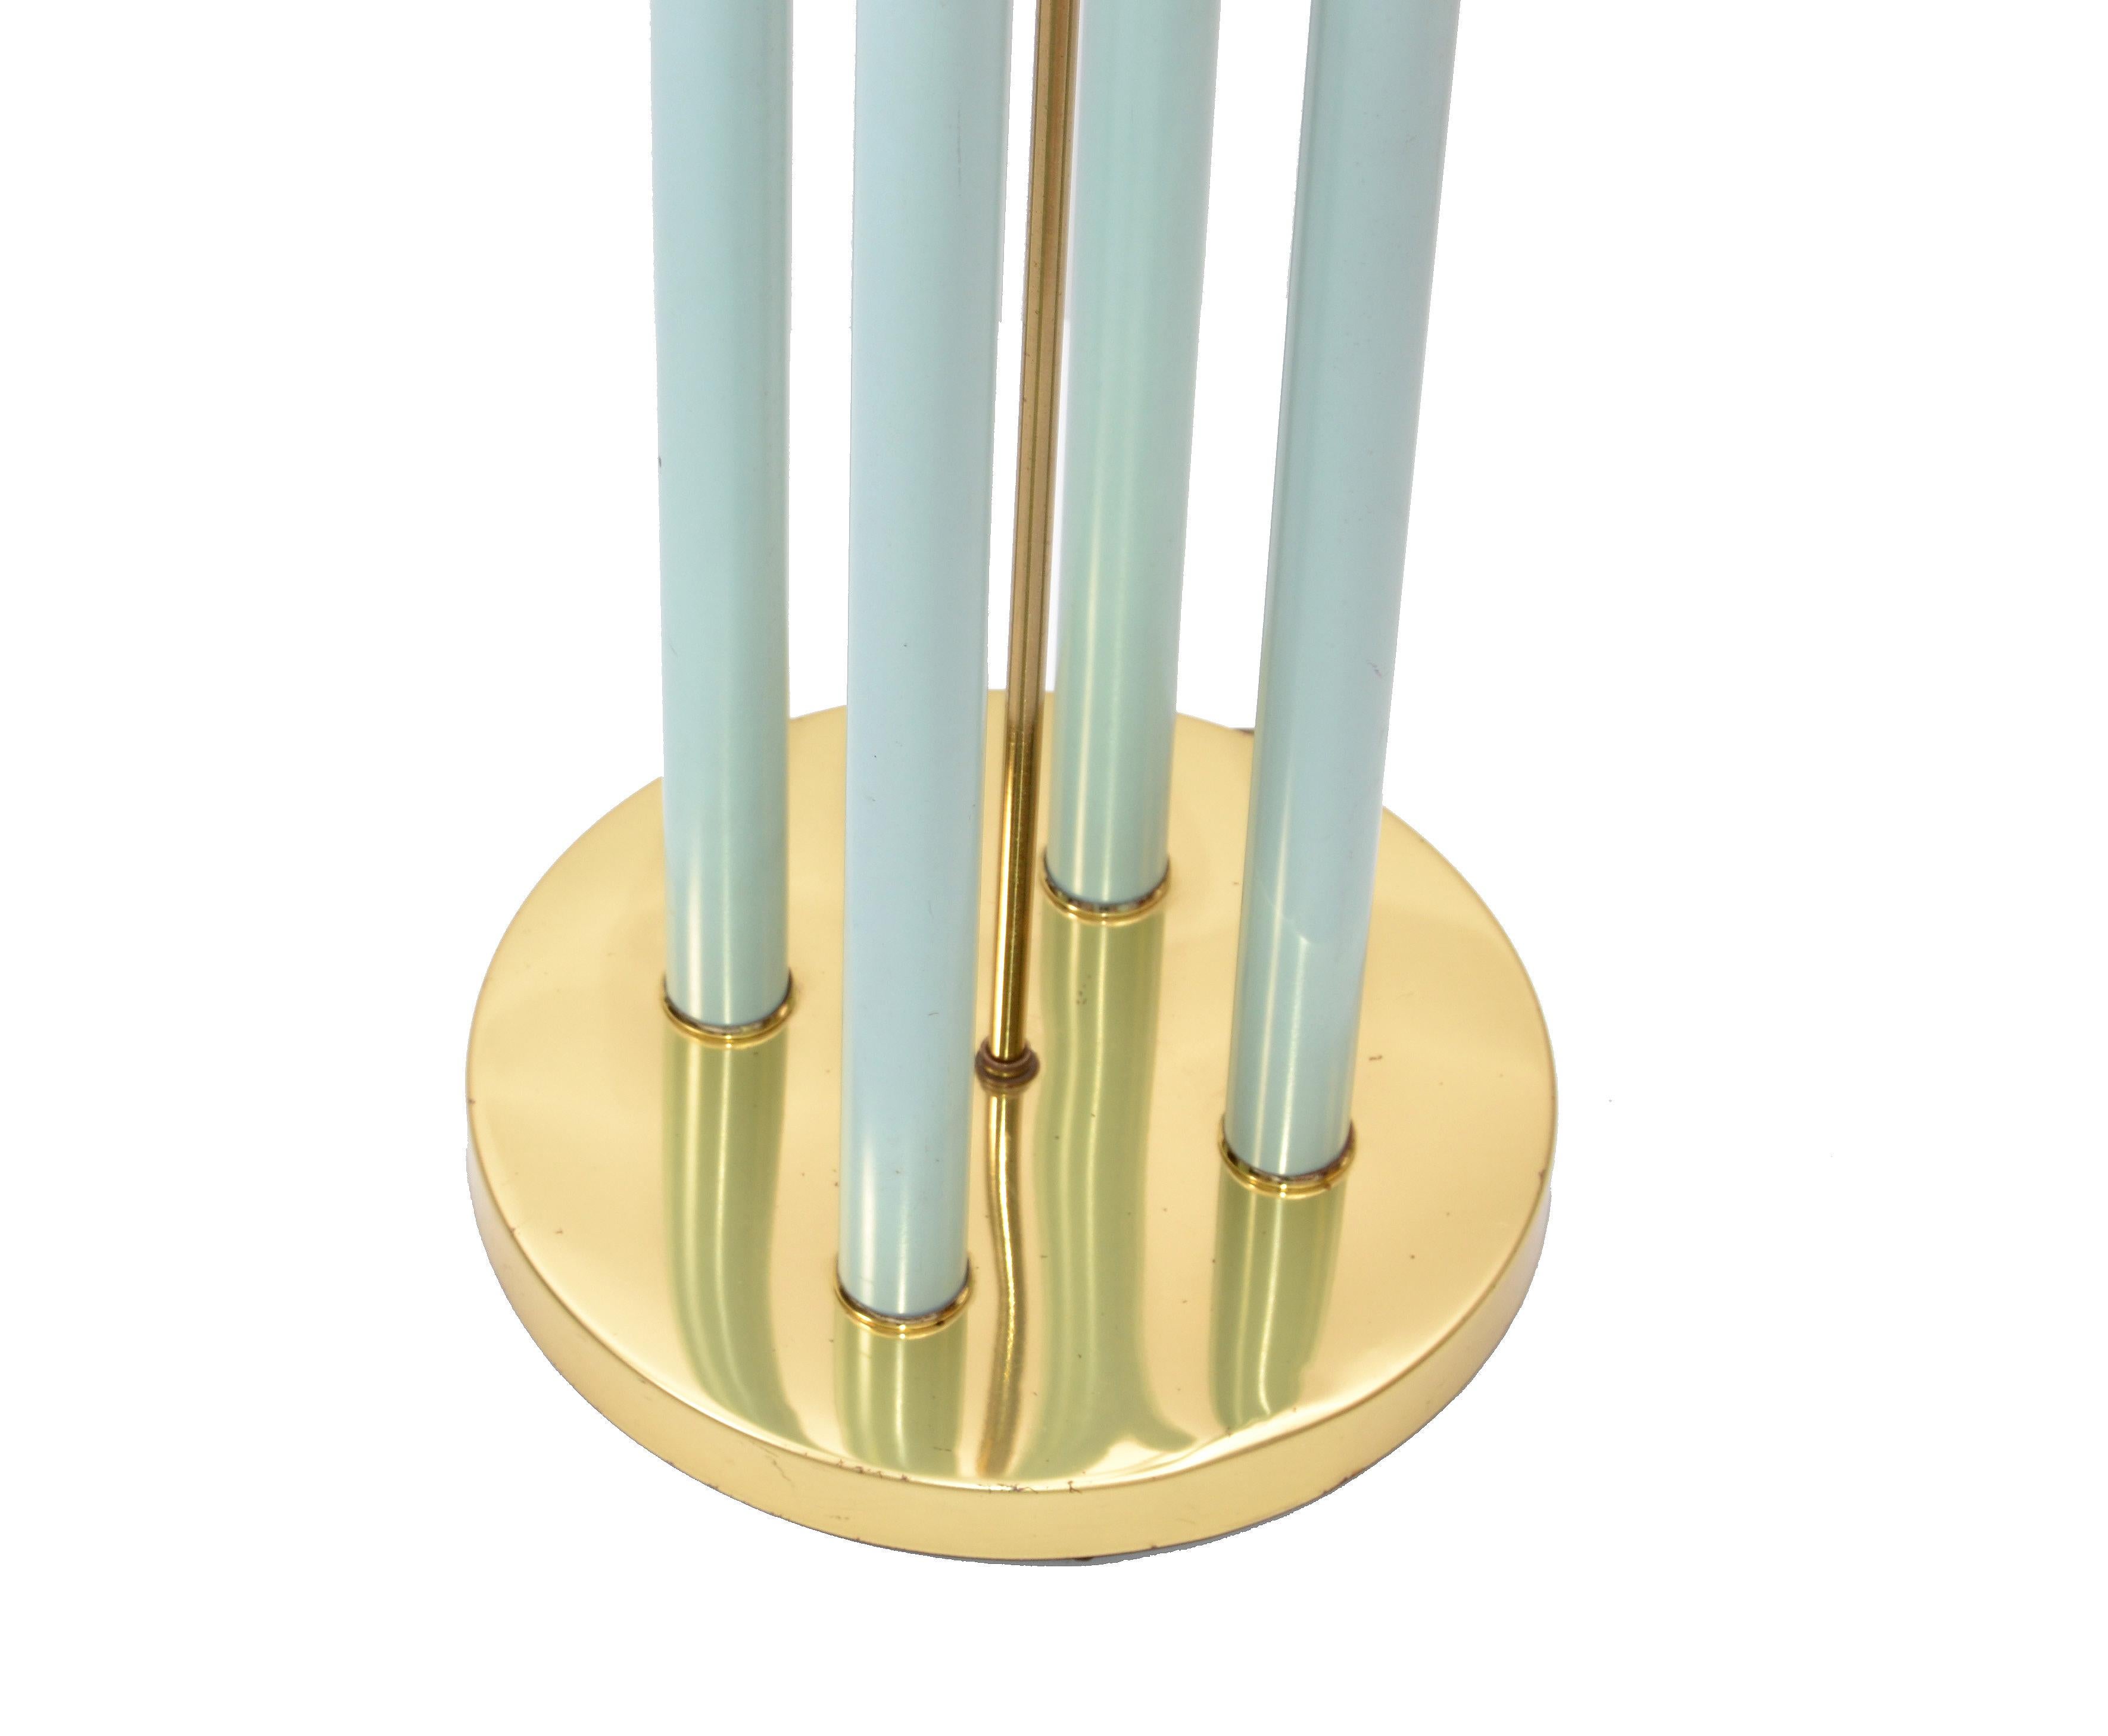 Painted Mid-Century Modern Brass-Plated and Turquoise Enamel Finish Floor Lamp For Sale